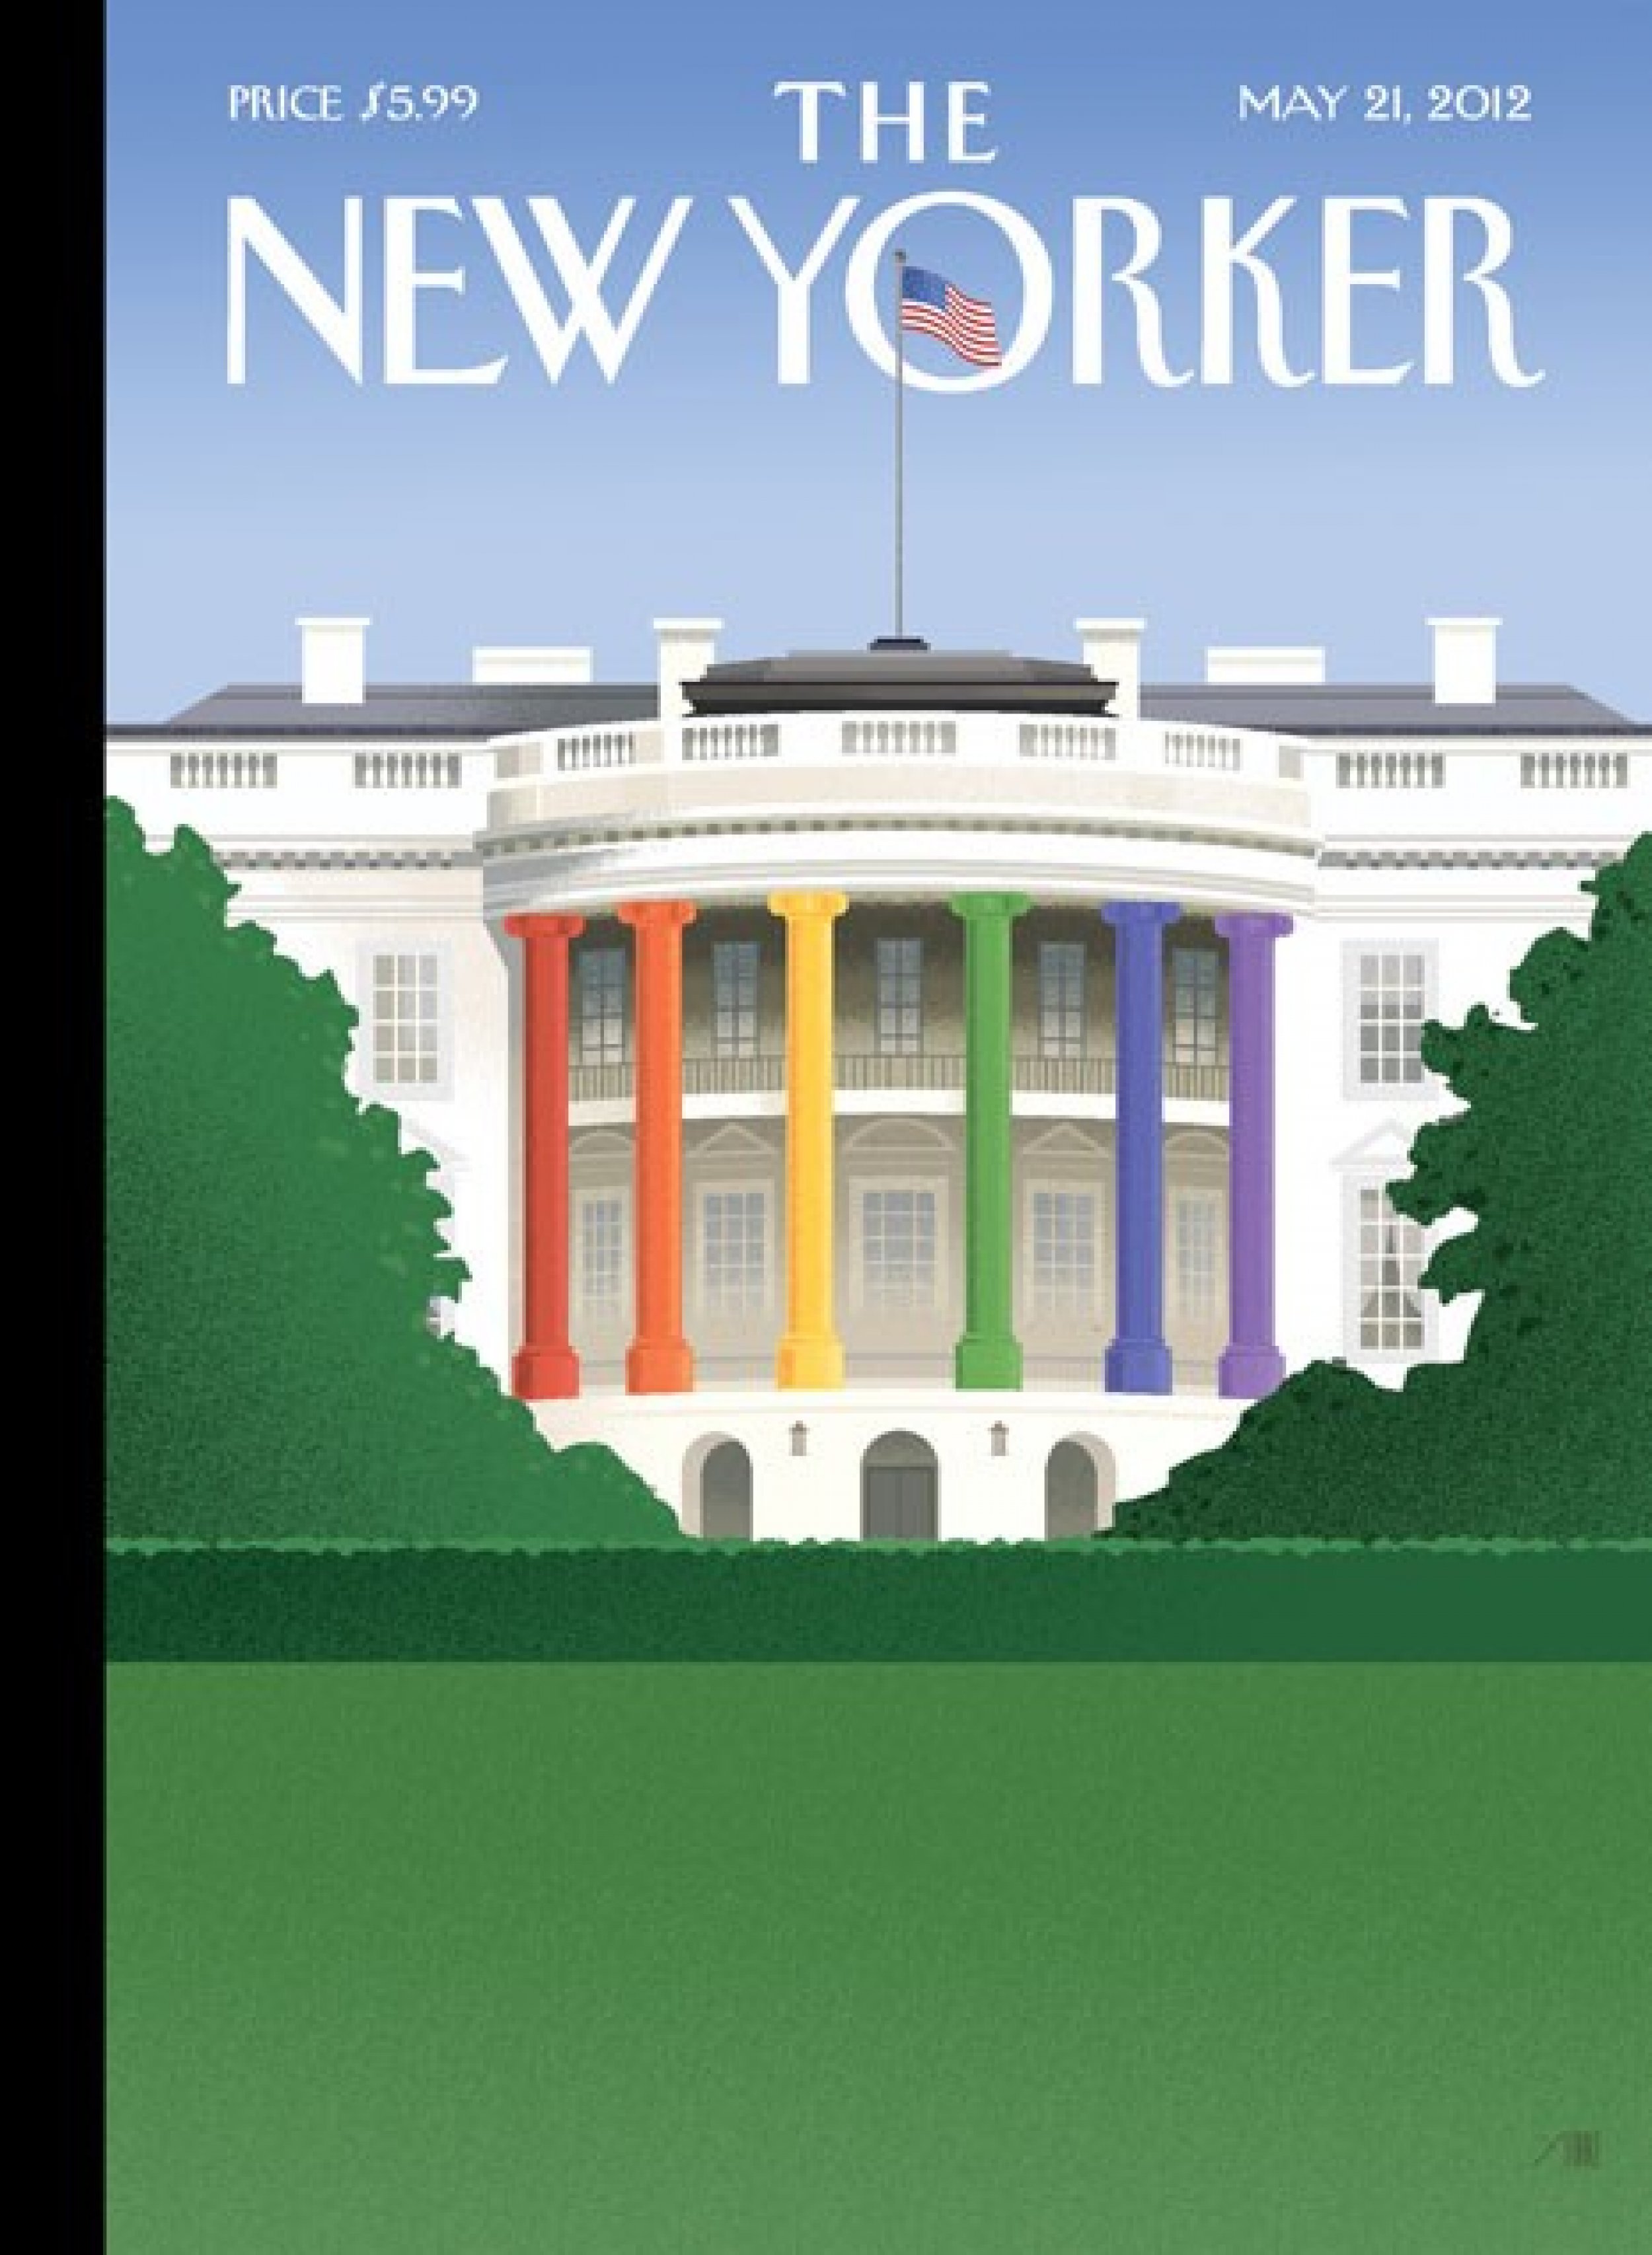 Check Out the New Yorker039s Gay Marriage Cover